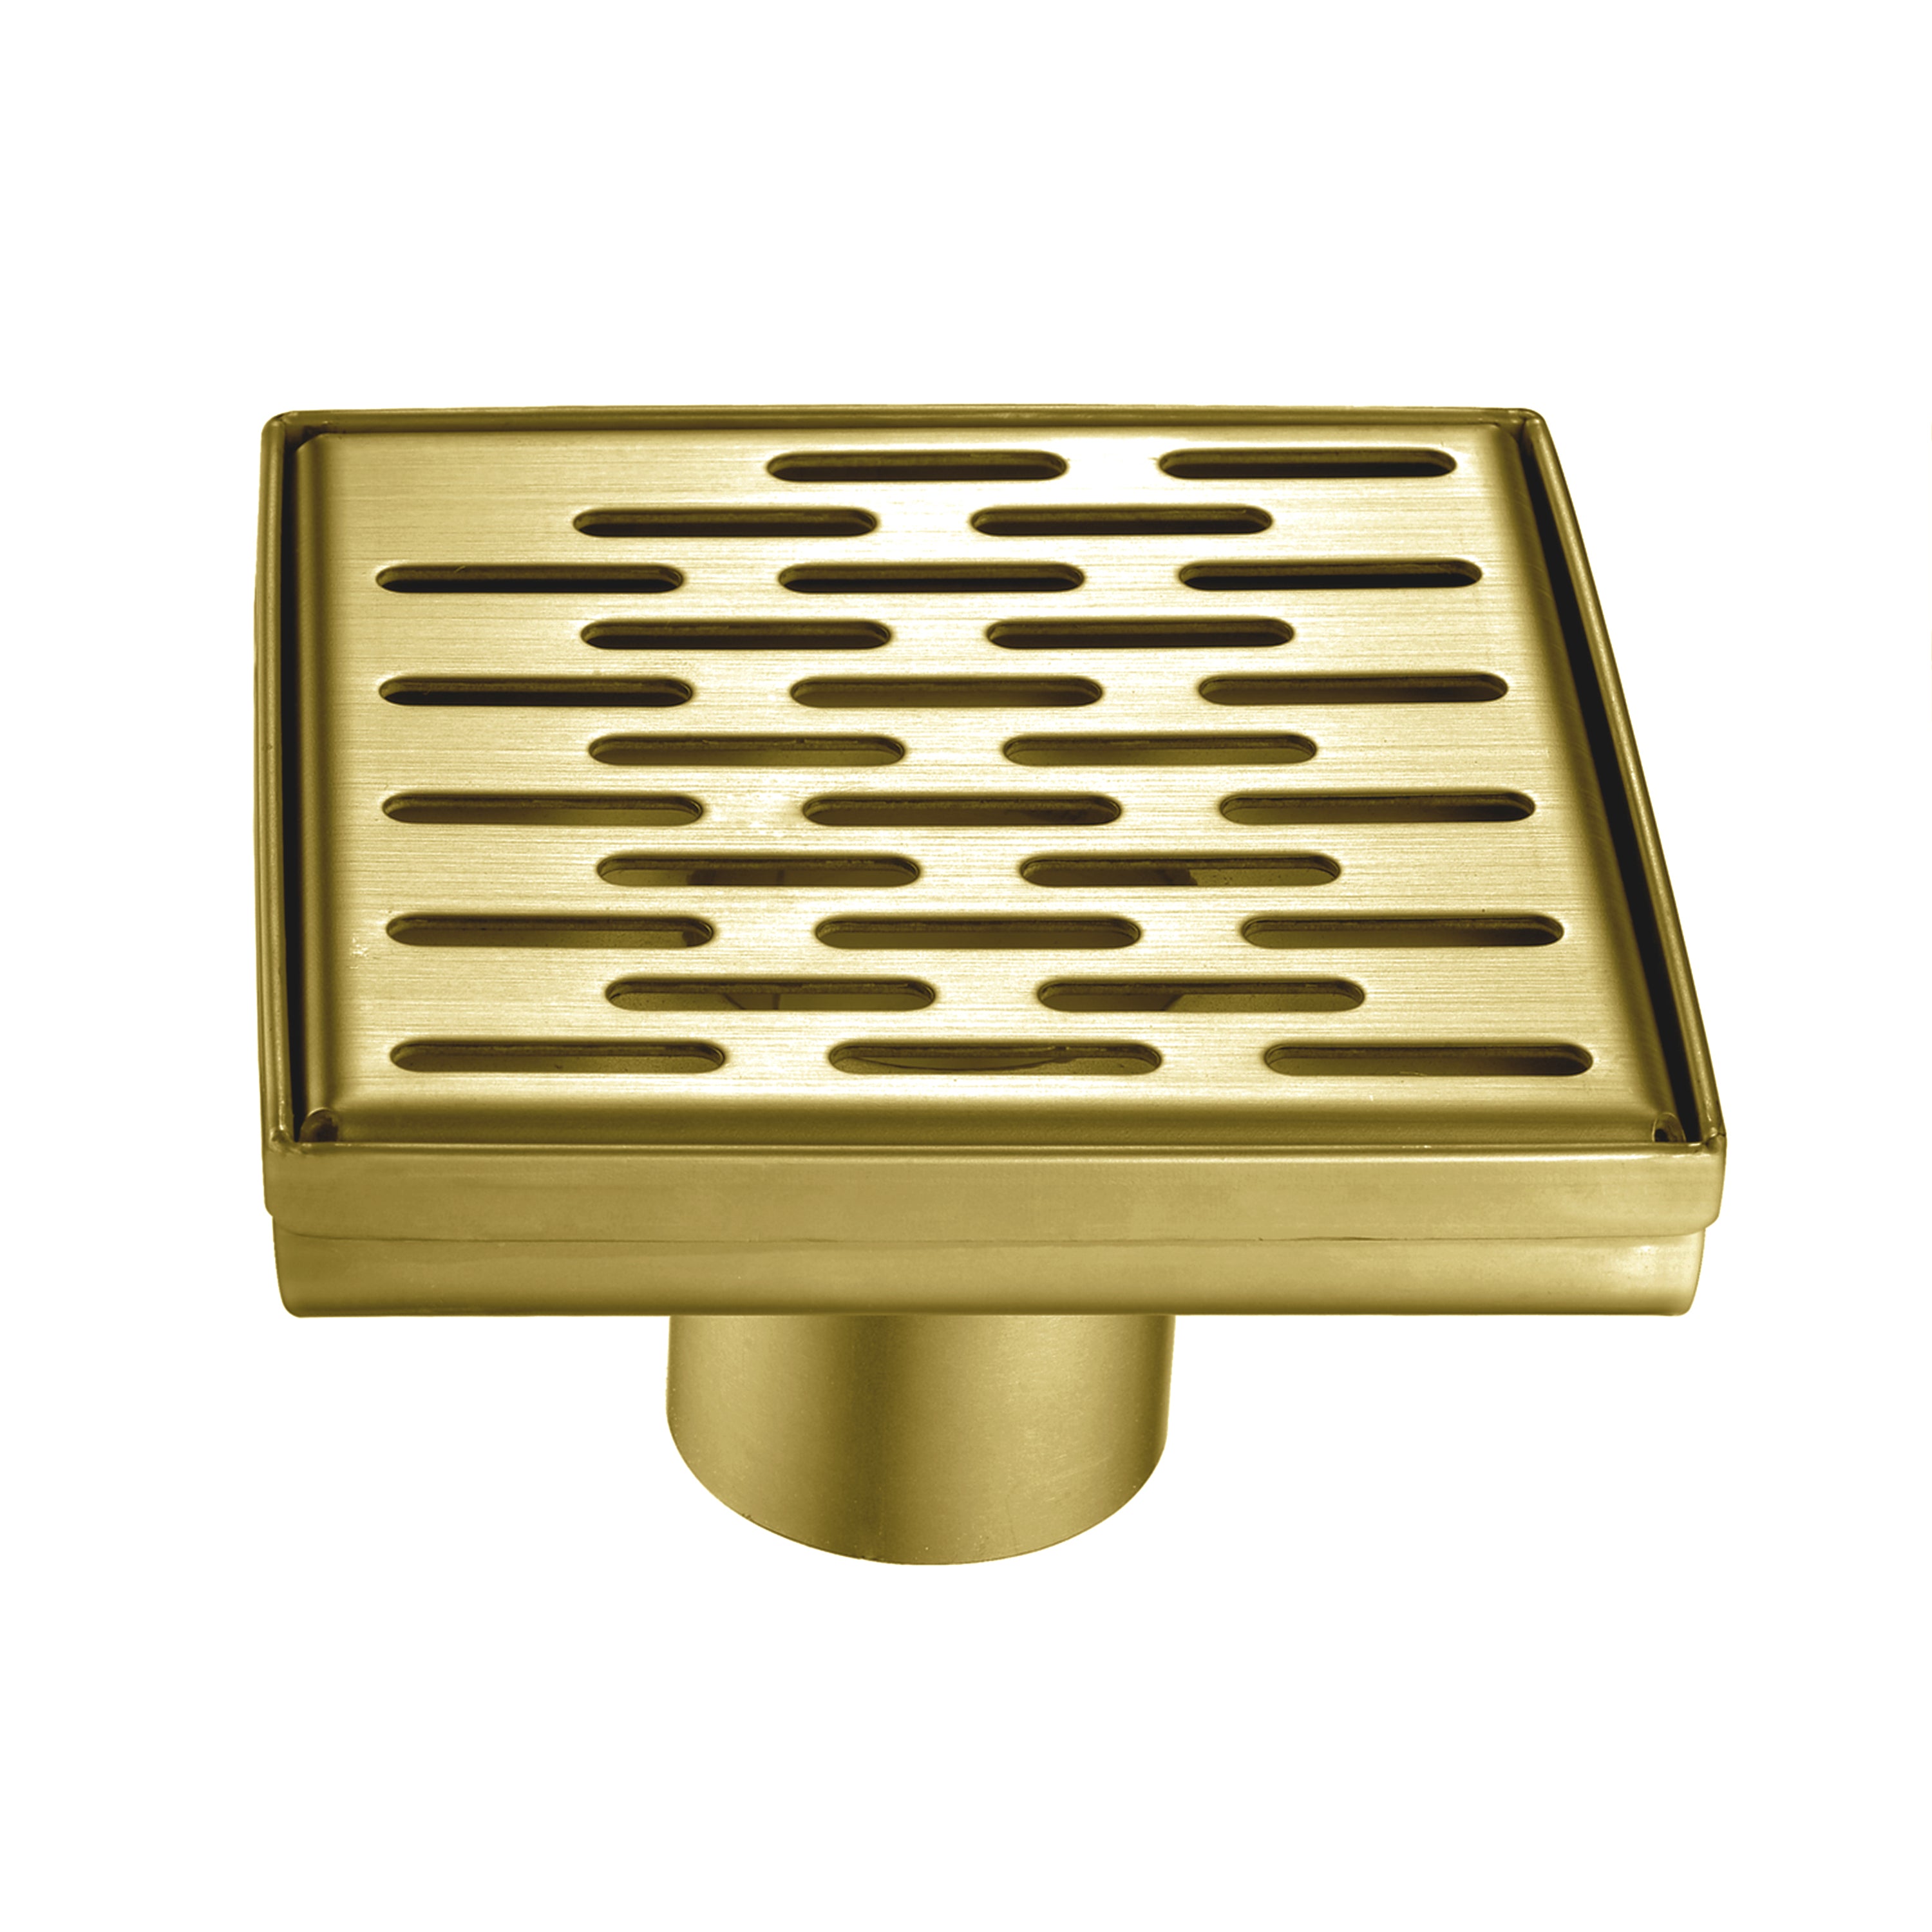 Brushed Gold 4-inch brass Shower Floor Drain with Removable